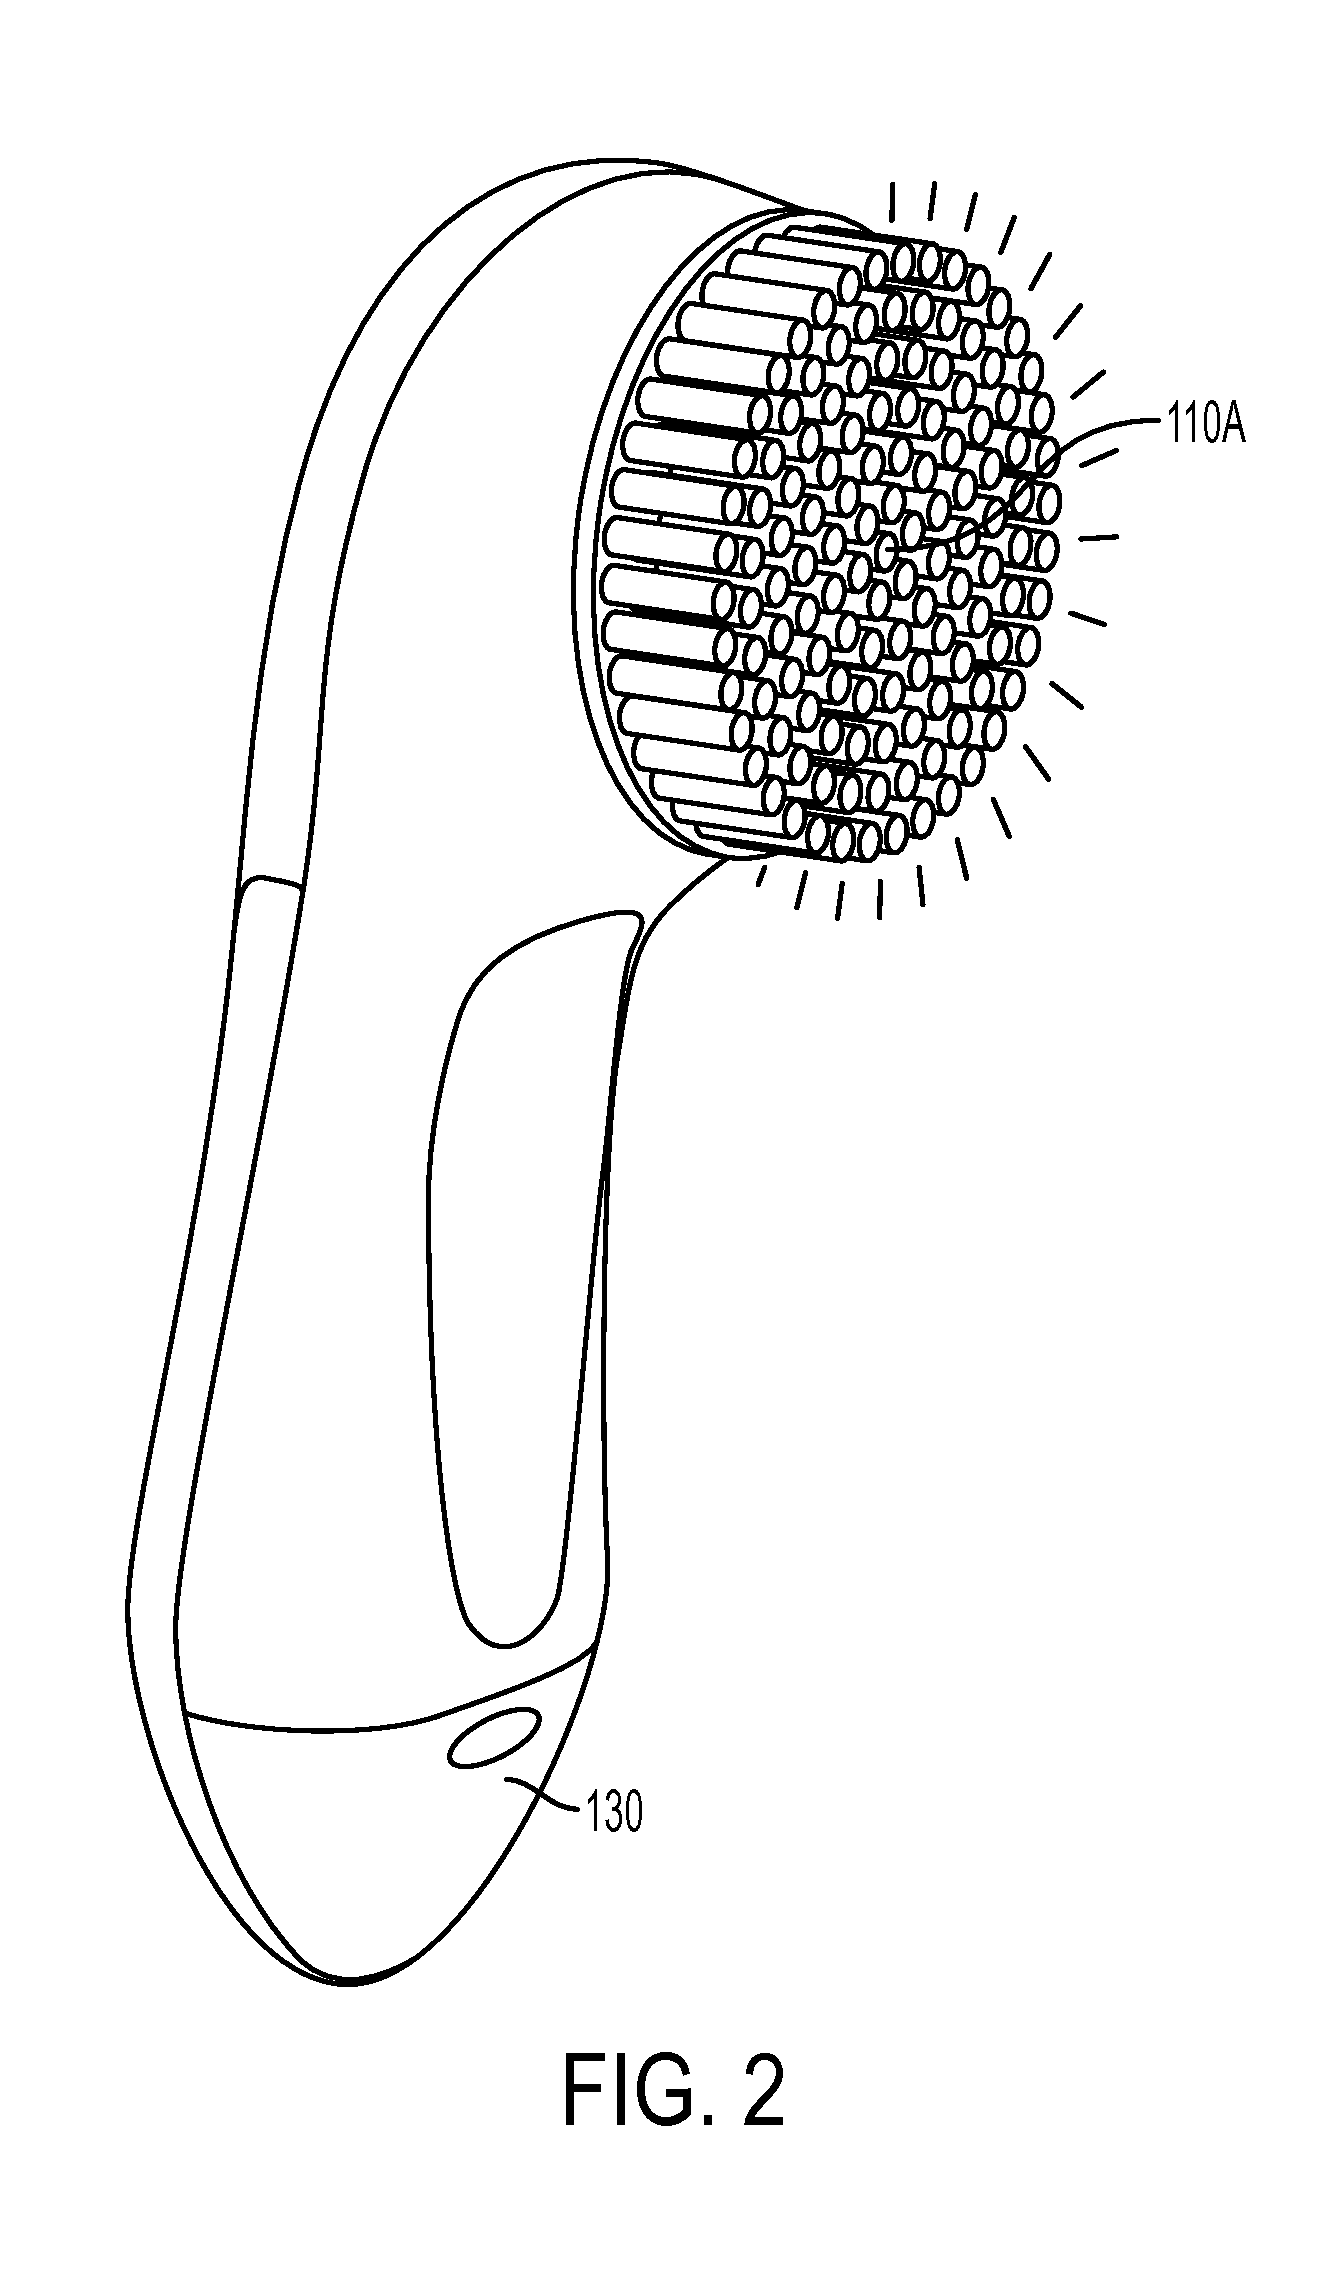 Skin treatment device and system